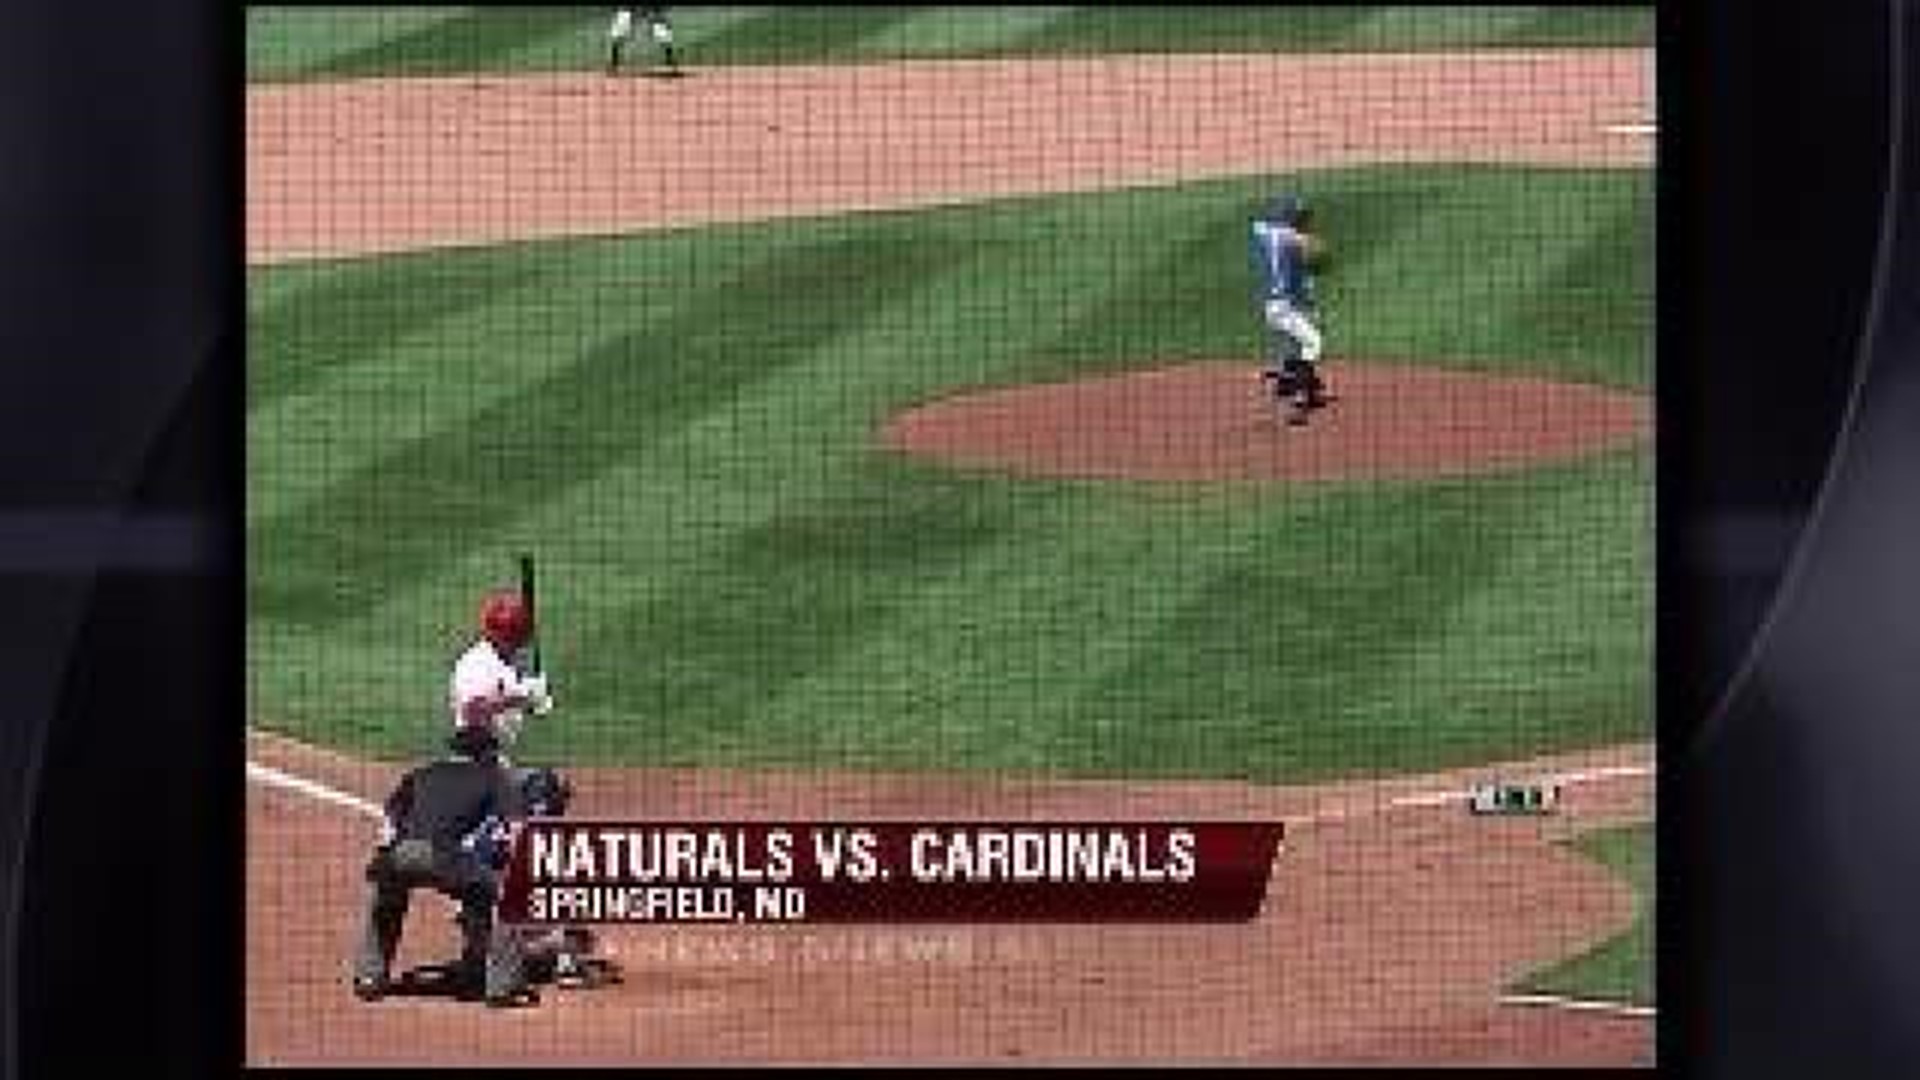 Naturals Fall in Pitchers Duel